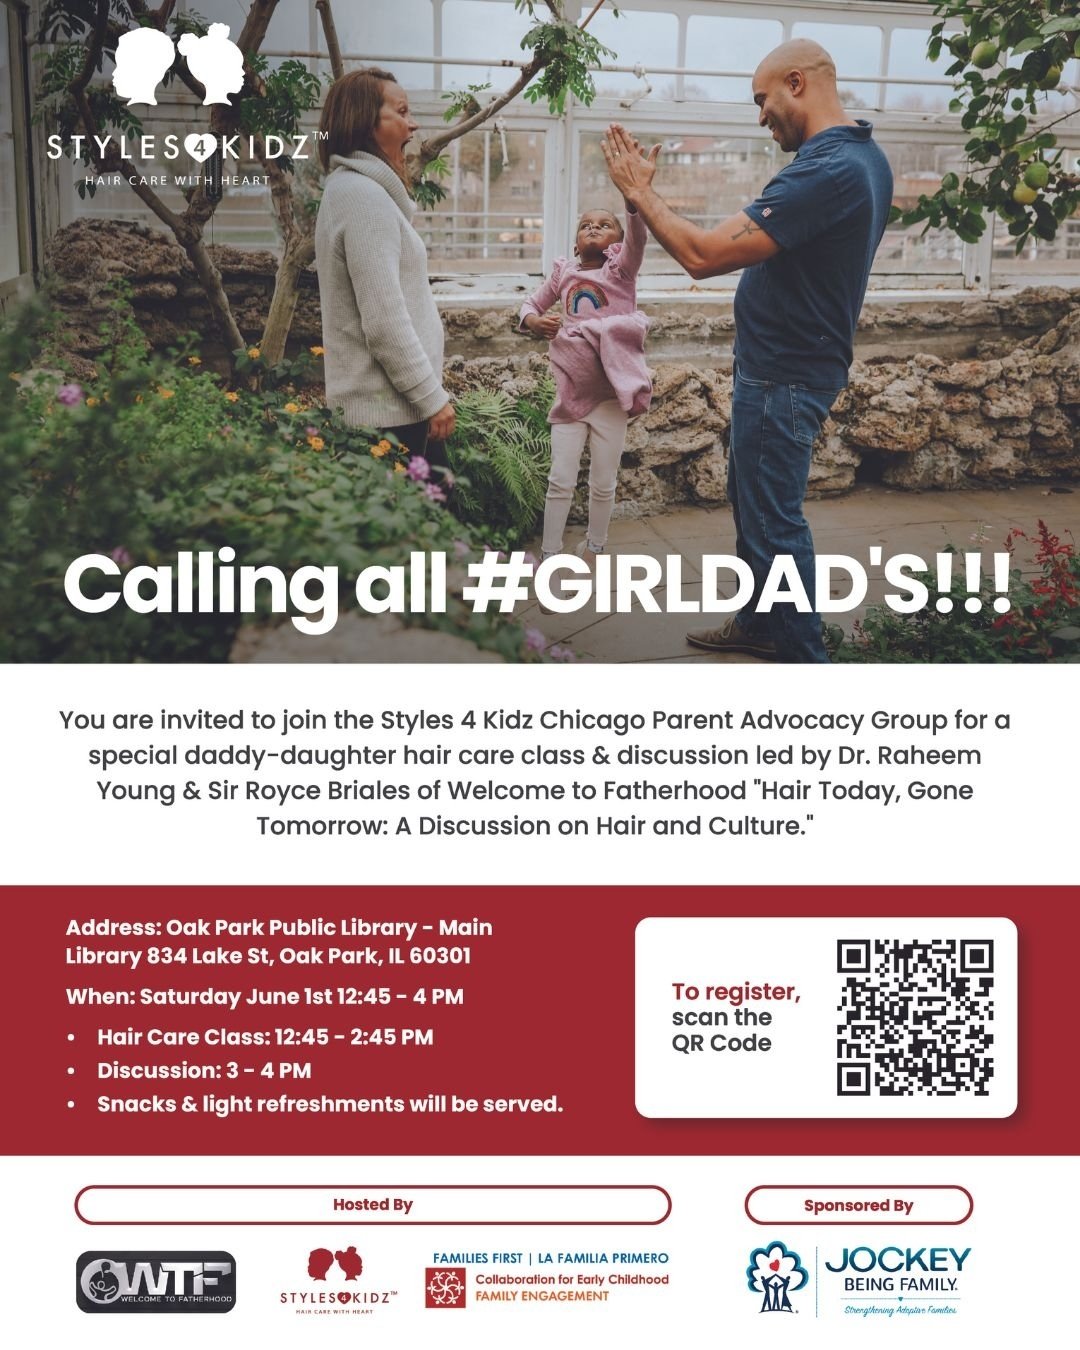 🚨 Calling all #GirlDads in Chicago! 🚨 Join us for an unforgettable event hosted by Styles 4 Kidz Chicago Parent Advocacy Group!

Get ready for a special daddy-daughter hair care class and engaging discussion led by the inspiring Dr. Raheem Young &a